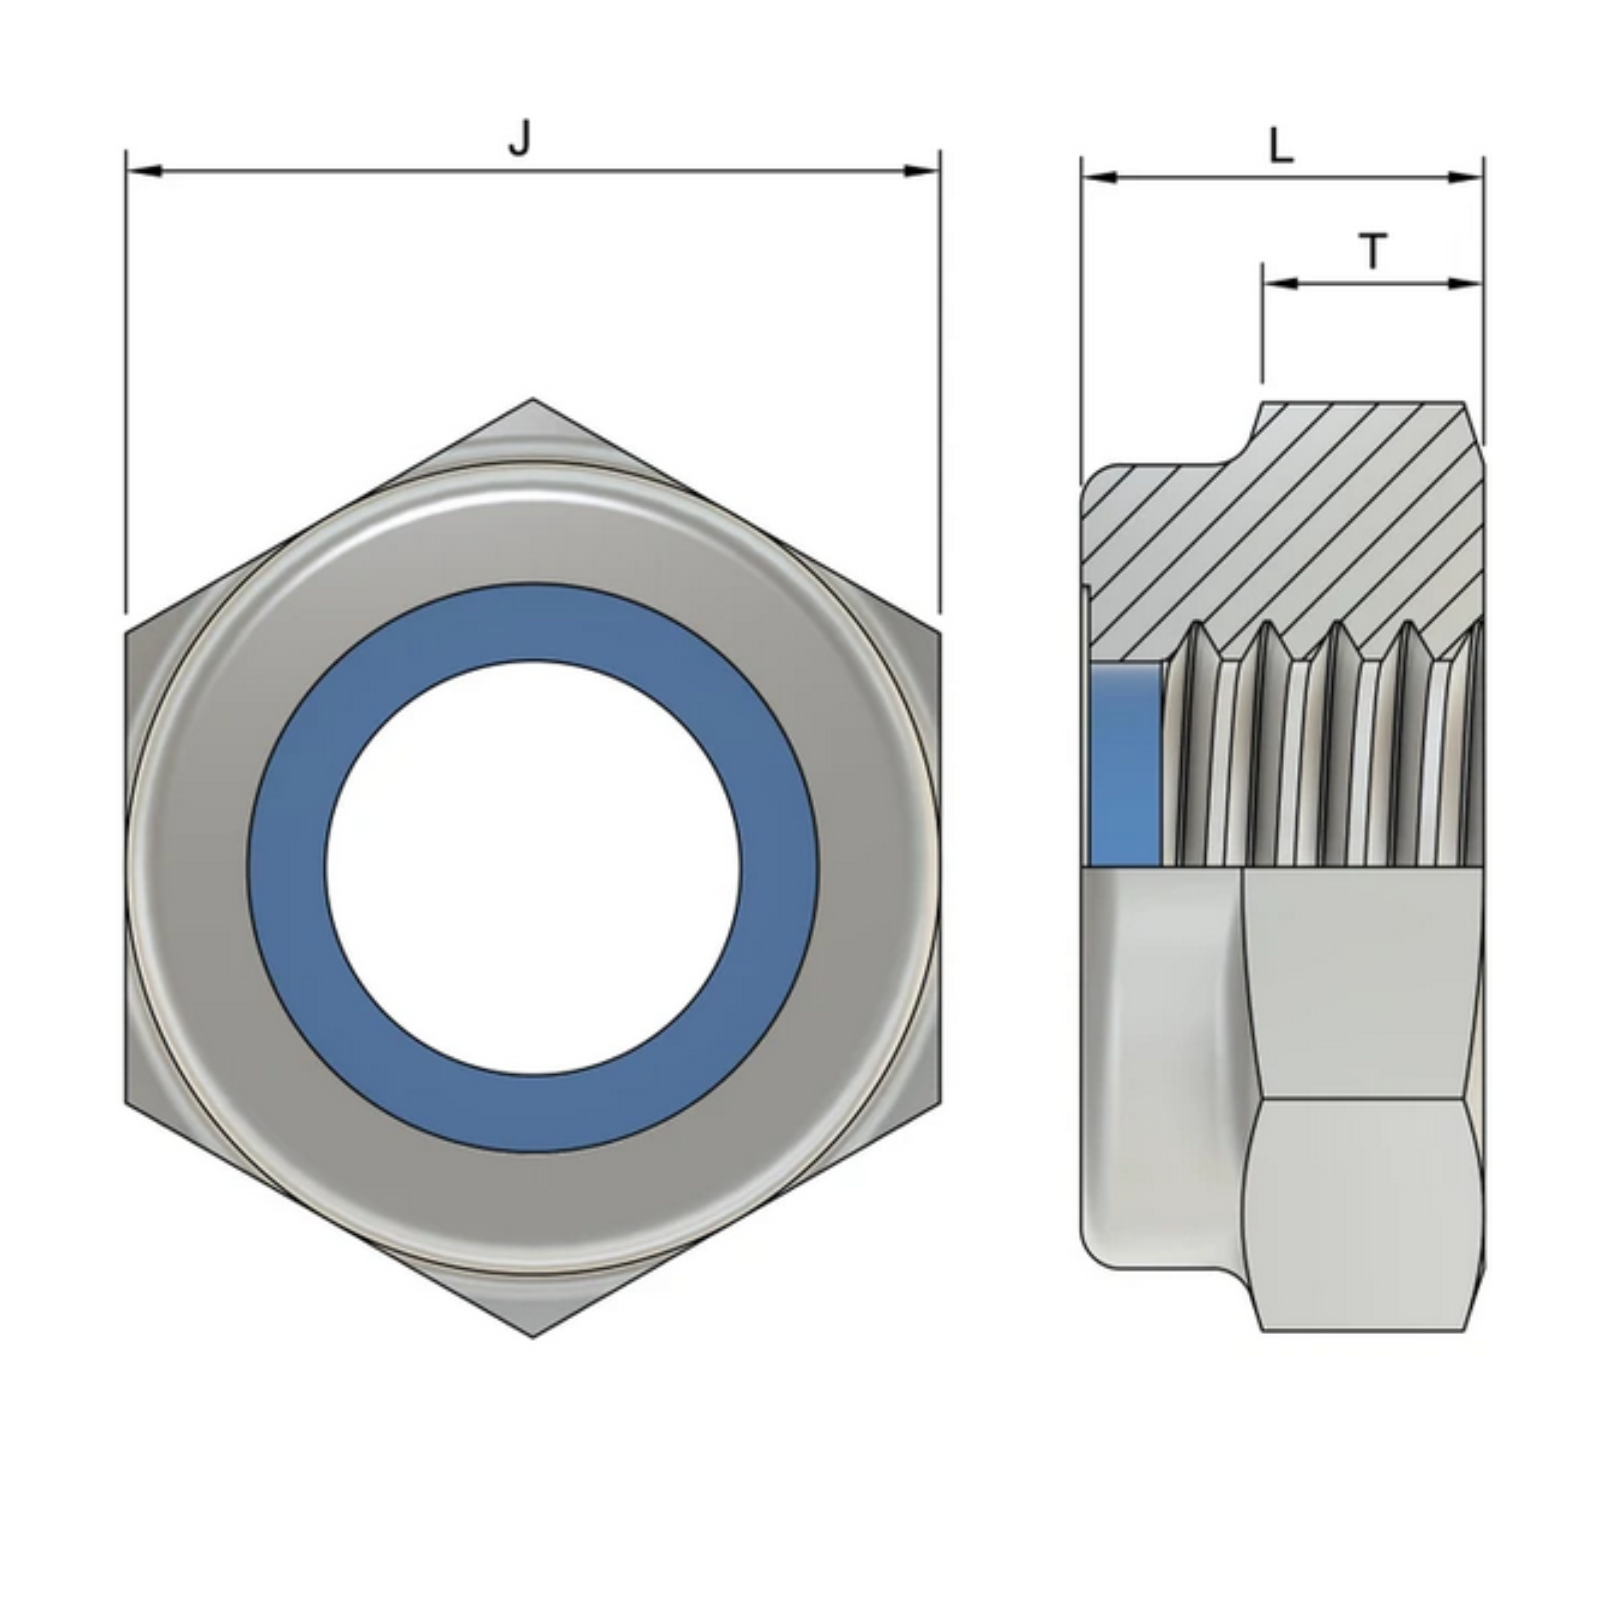 M5 Hexagon Nylon Locking Nuts (DIN 985) - Stainless Steel (A2)